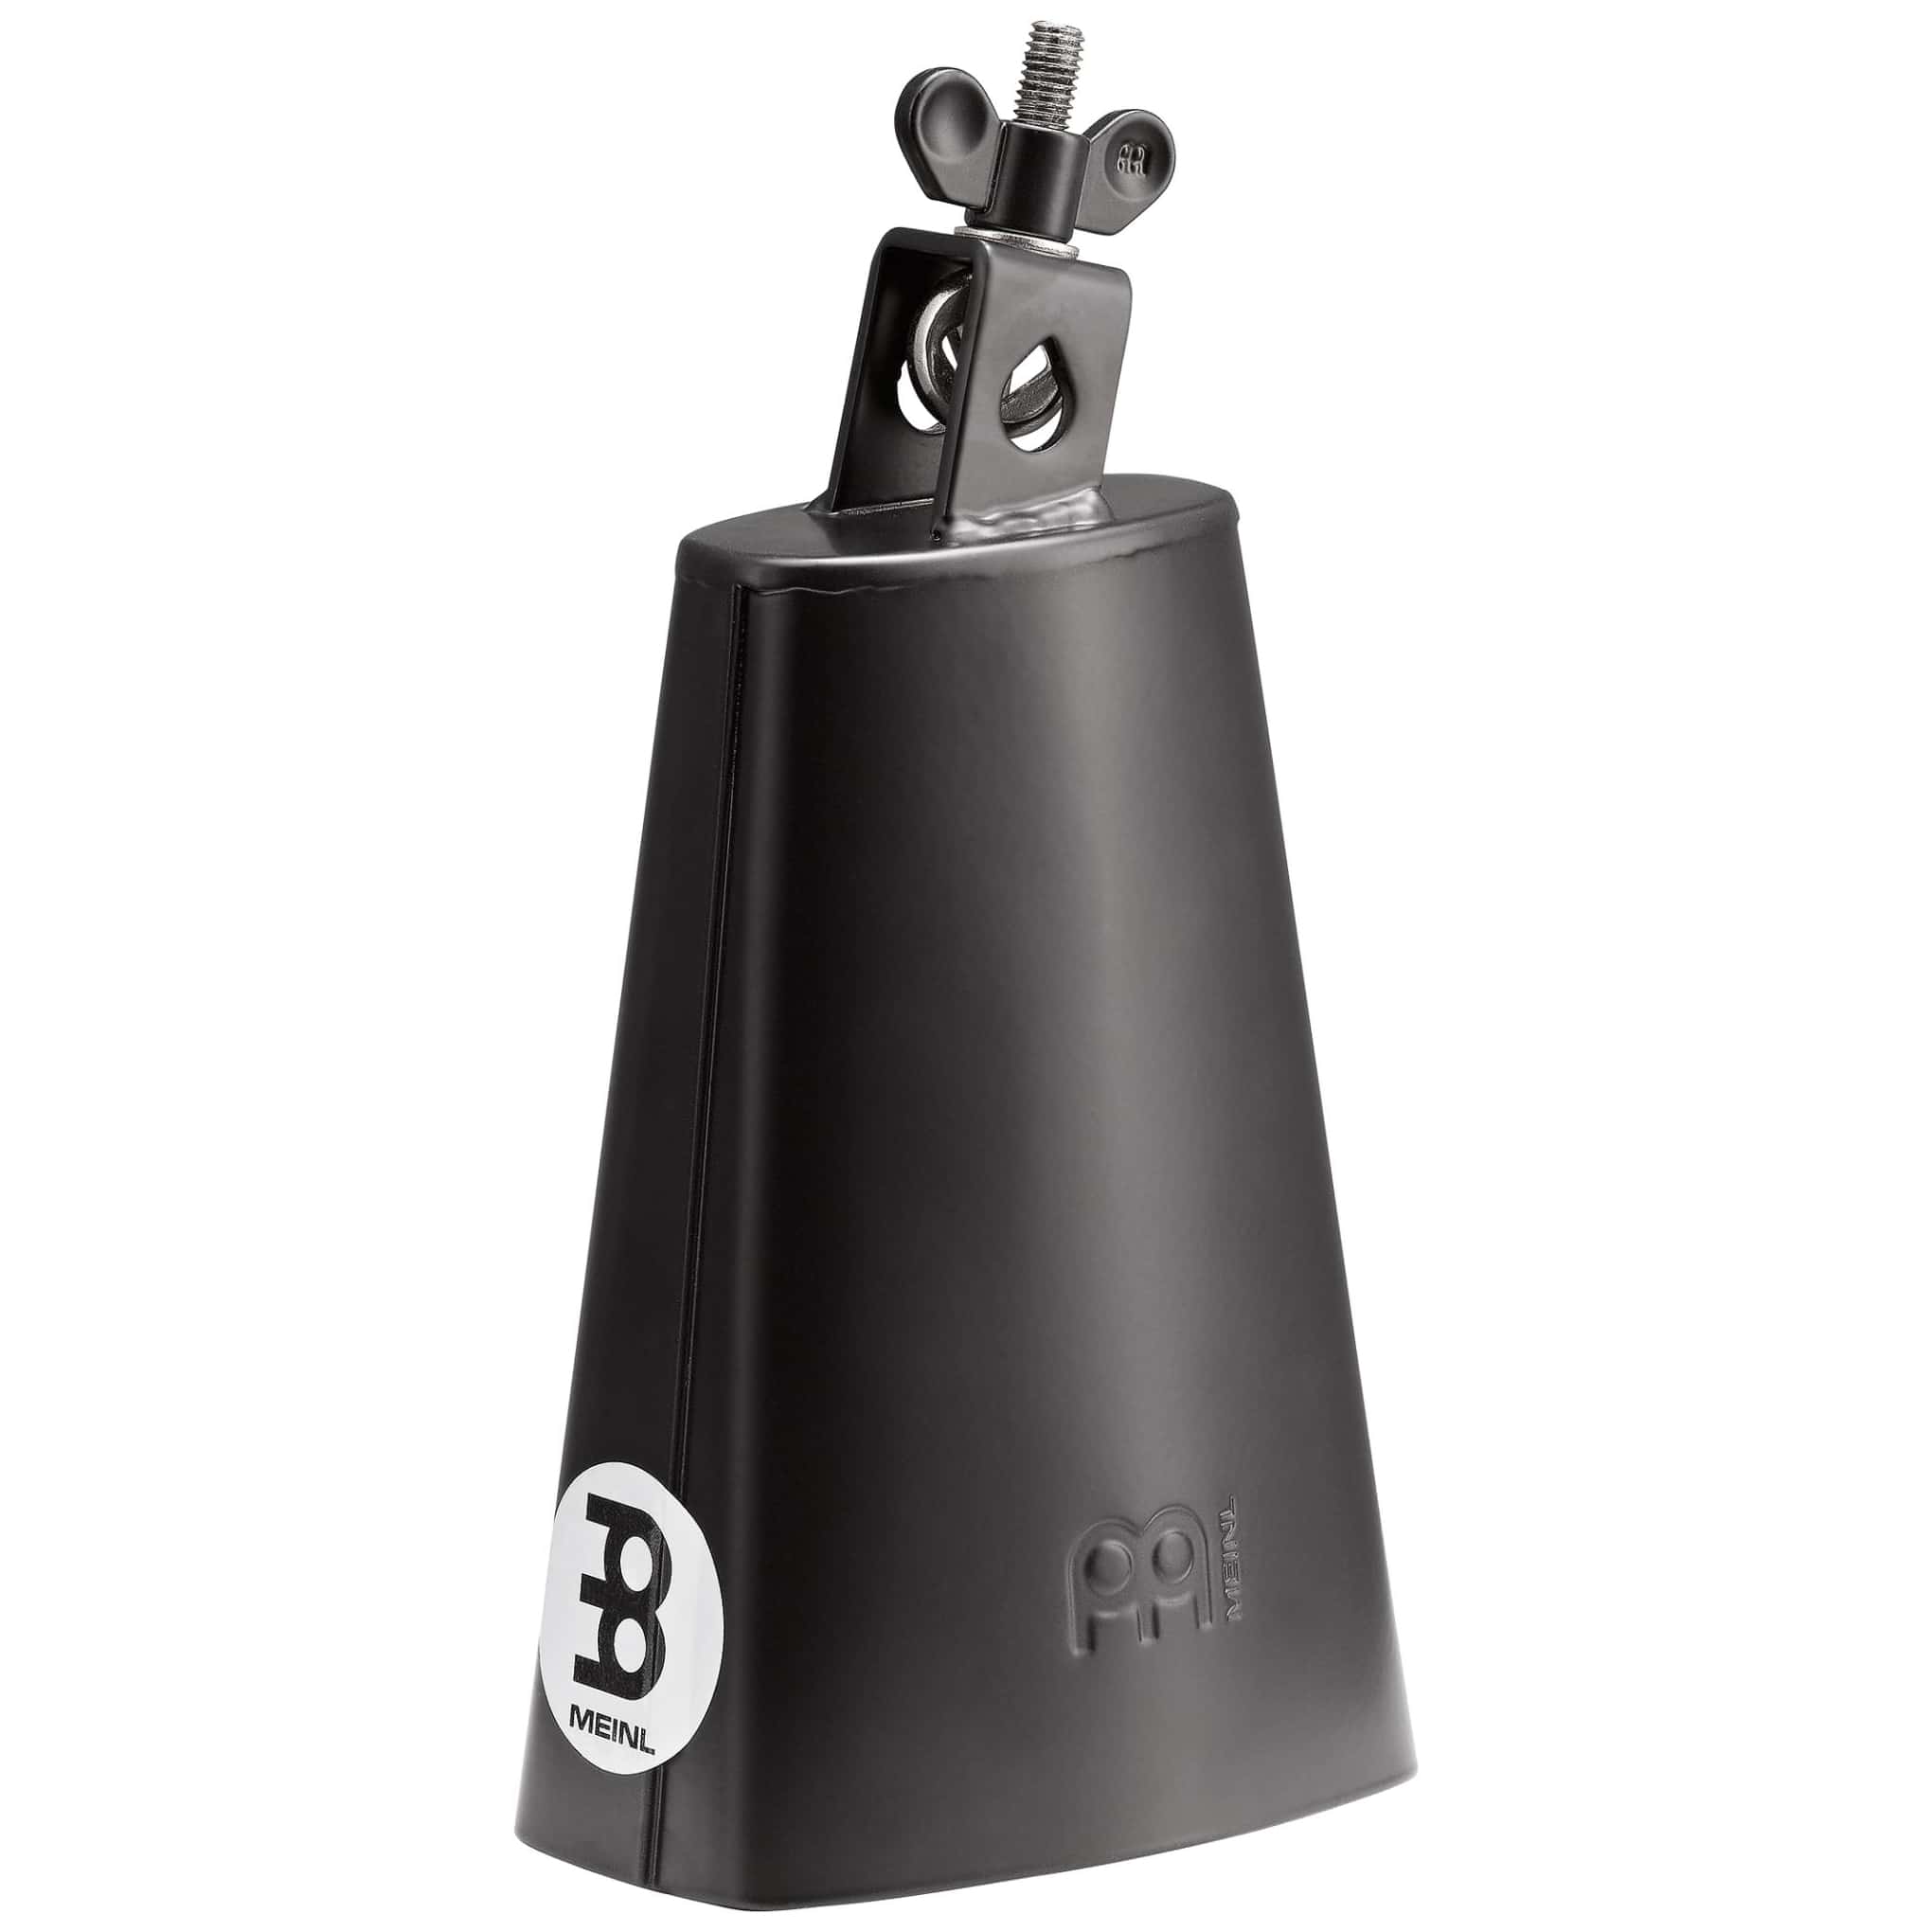 Meinl Percussion SL675-BK - 6 3/4" Black Finish Cowbell, Medium Timbales Cowbell